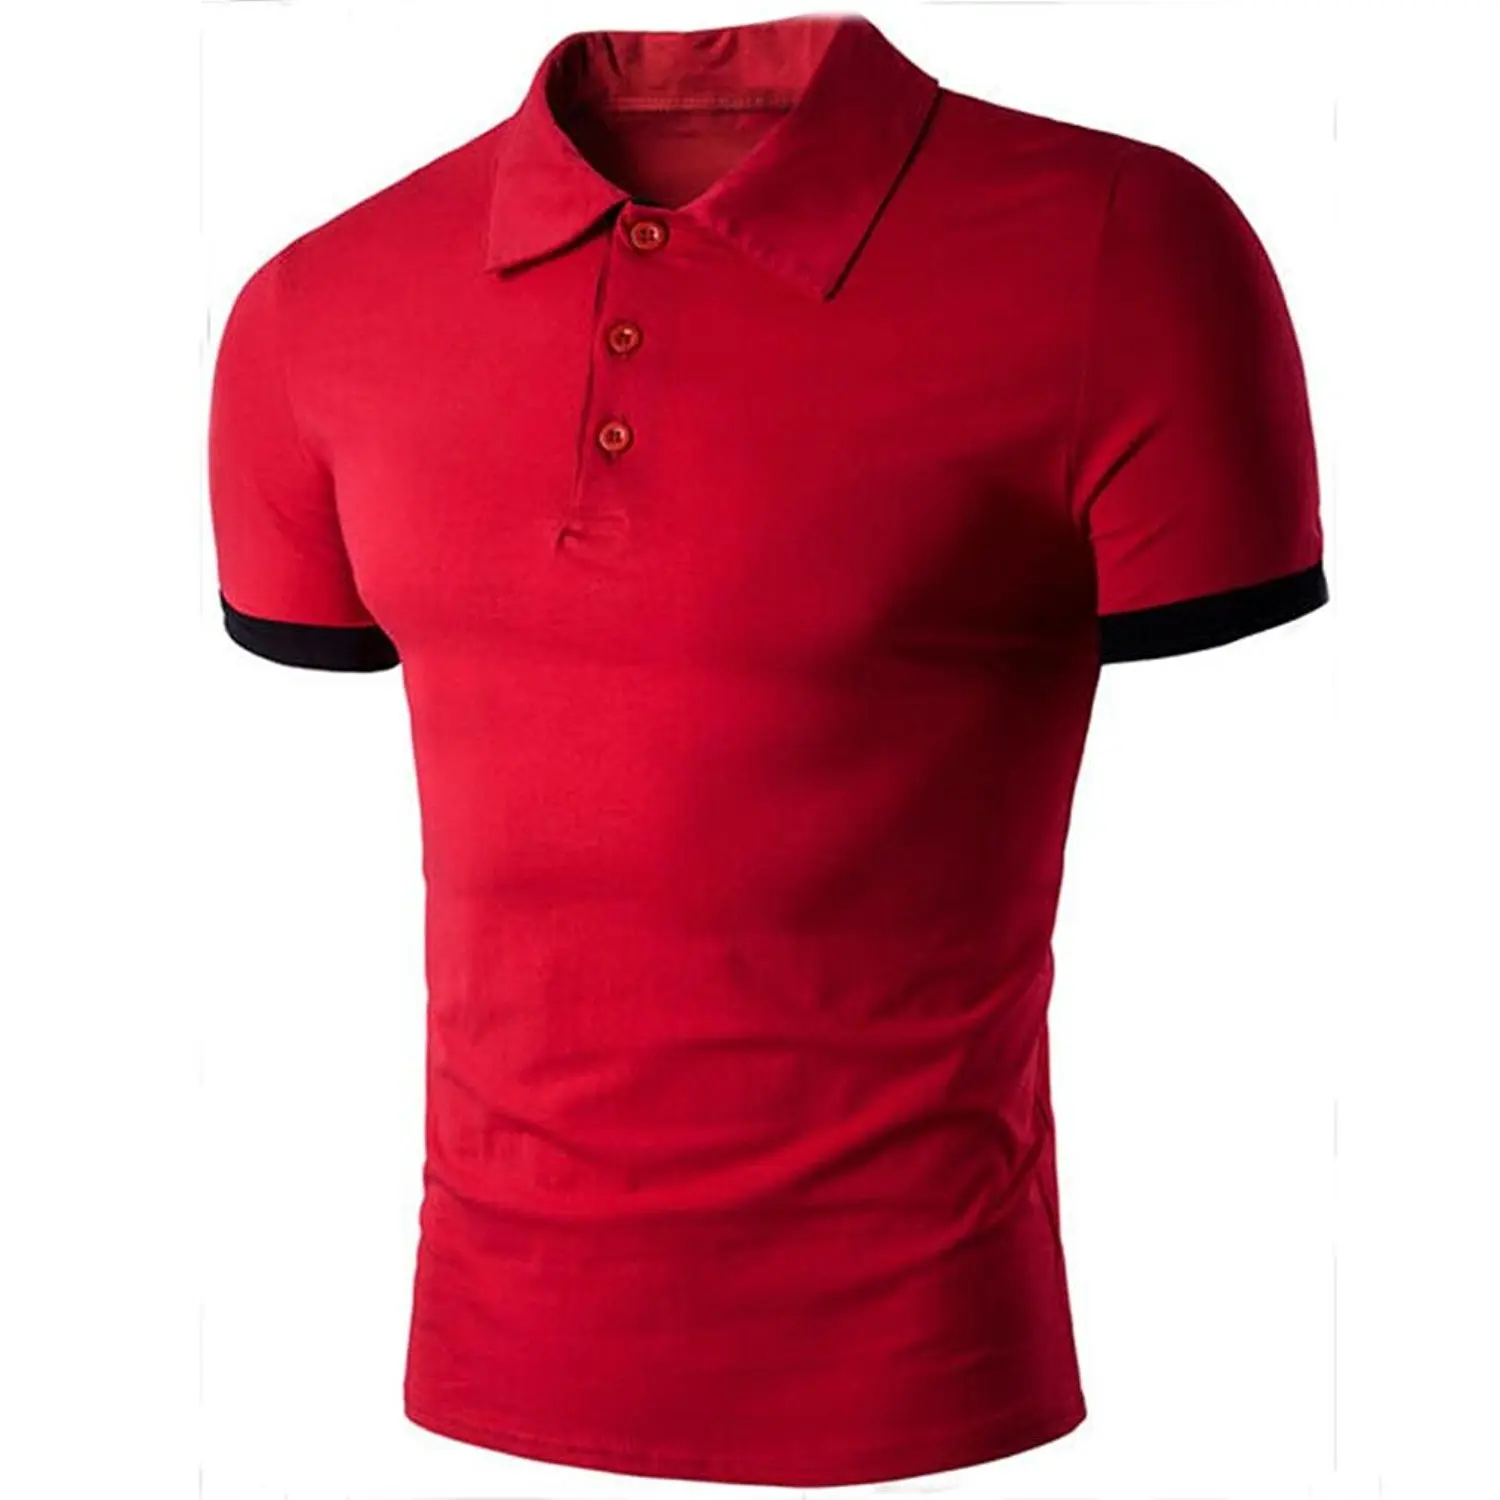 Cheap Mens Polo Neck Tops, find Mens Polo Neck Tops deals on line at ...